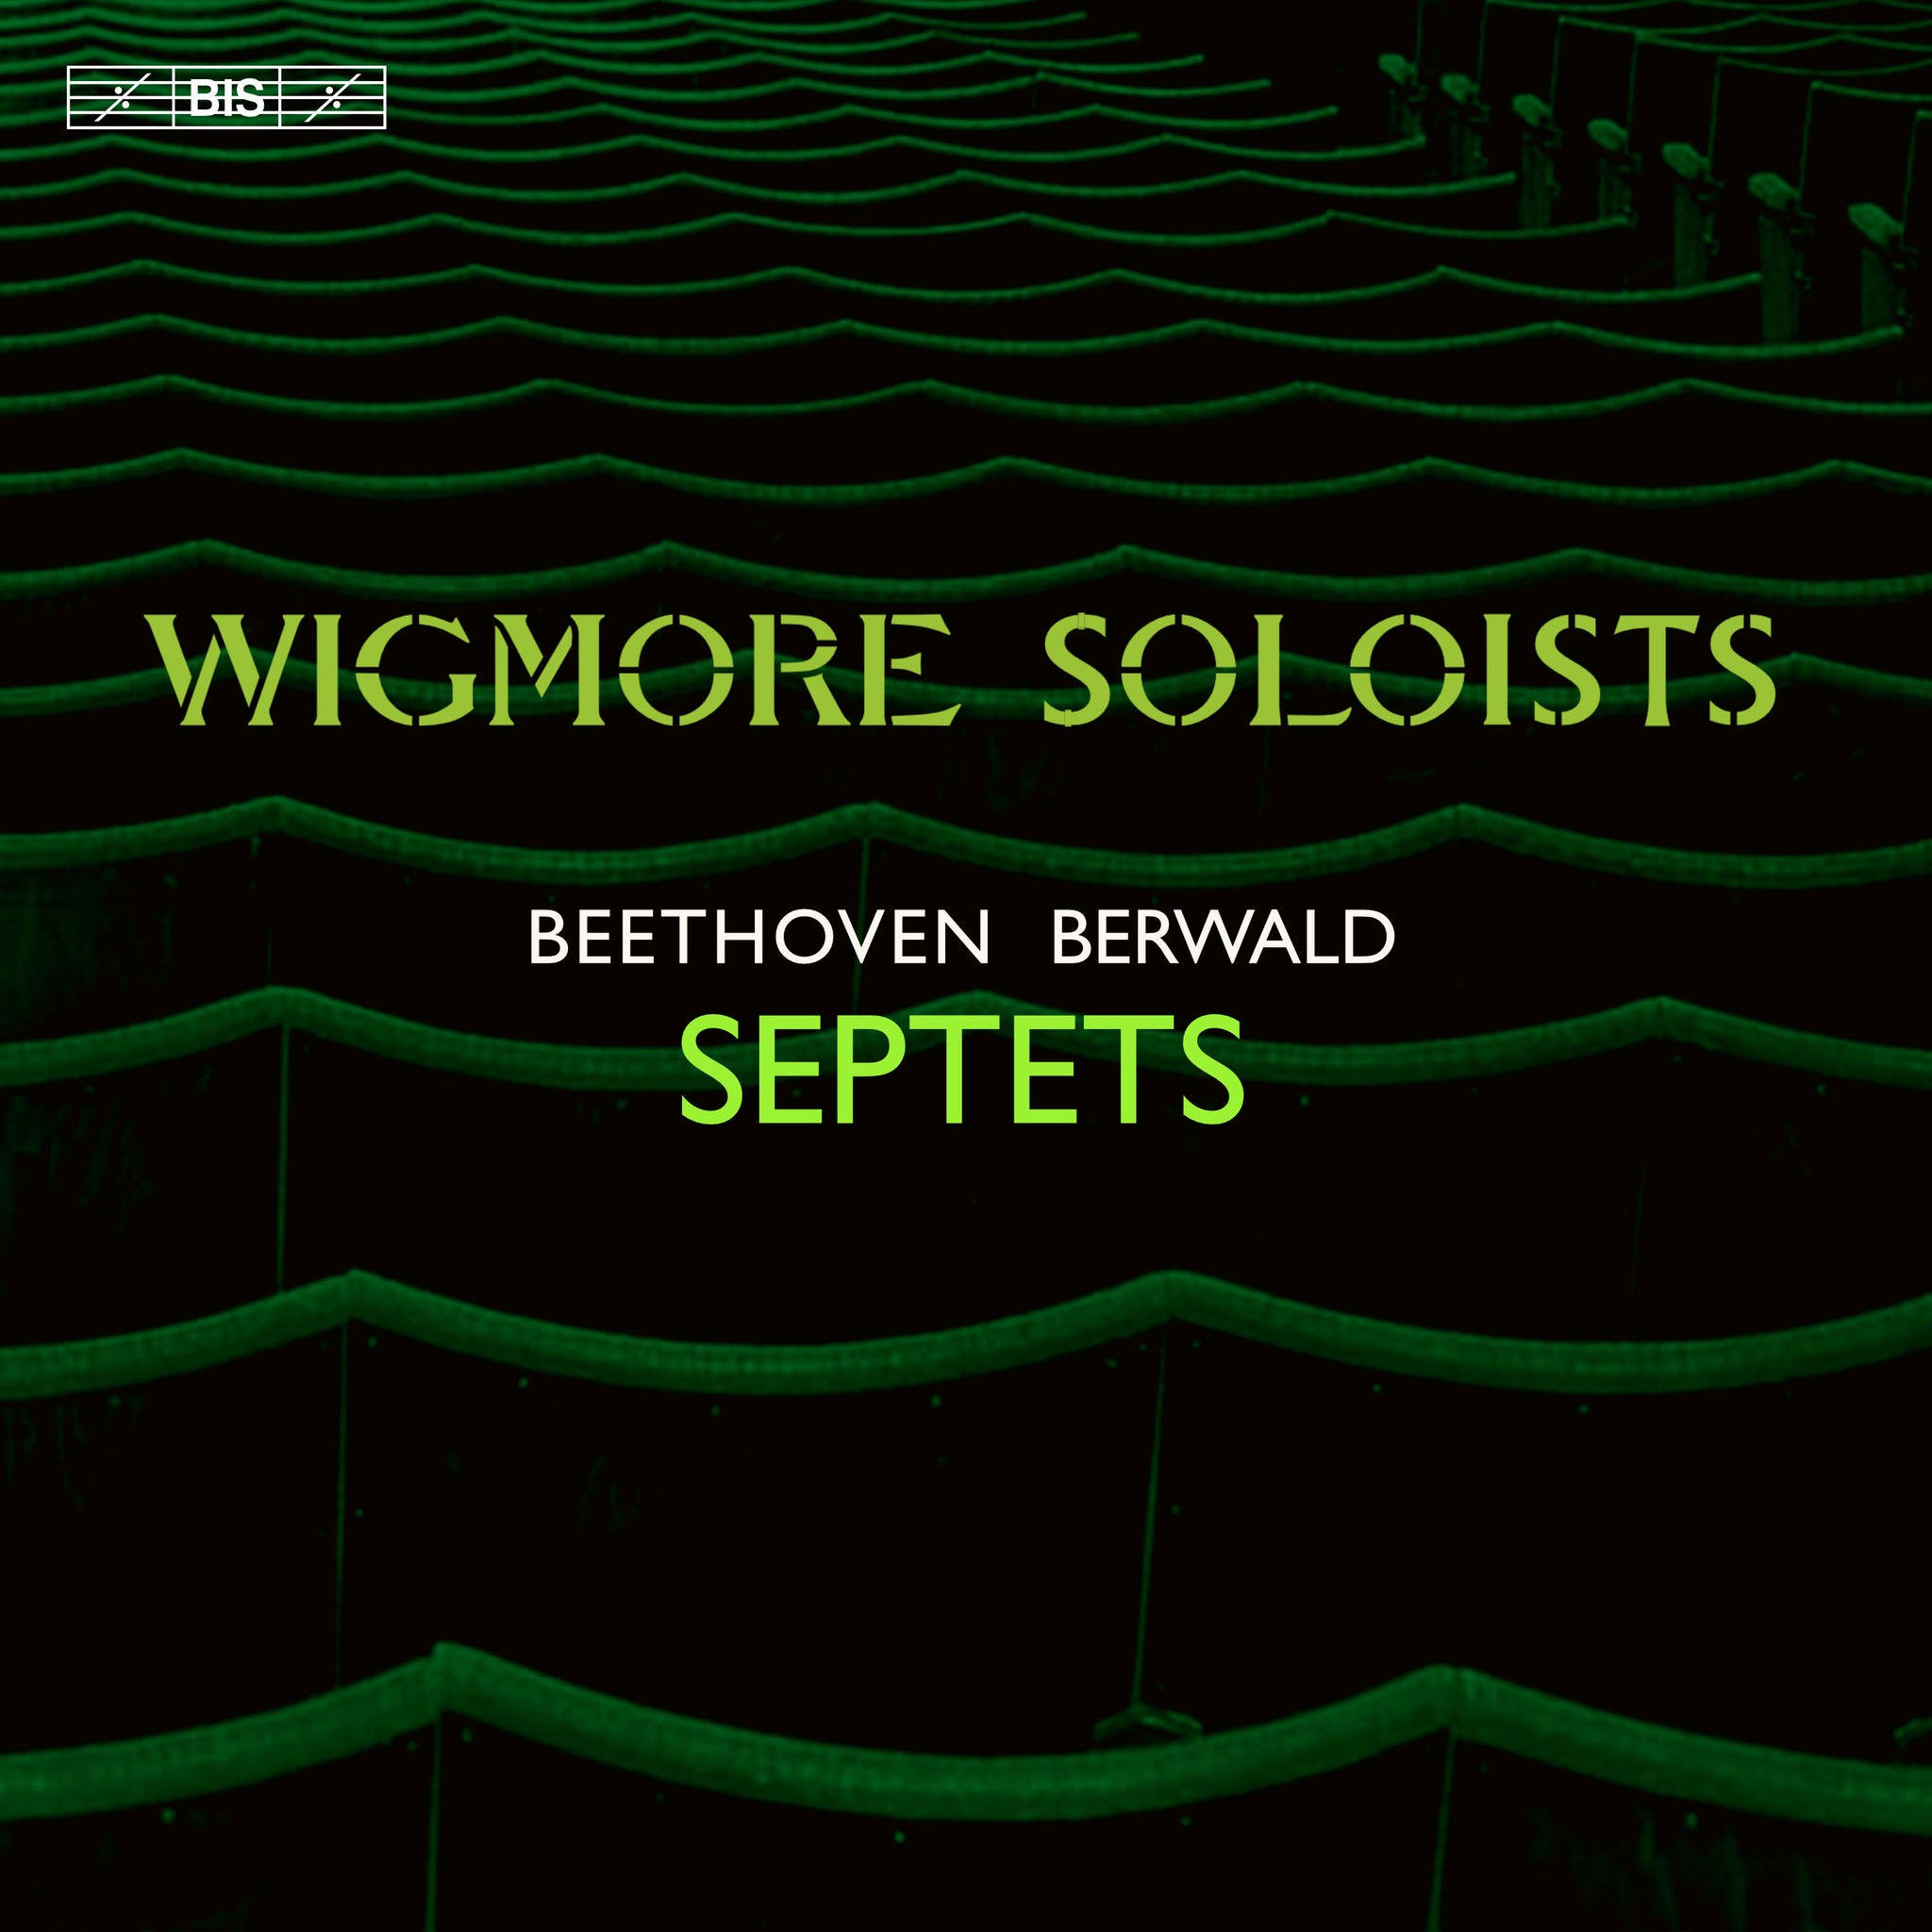 Beethoven & Berwald: Septets / Wigmore Soloists